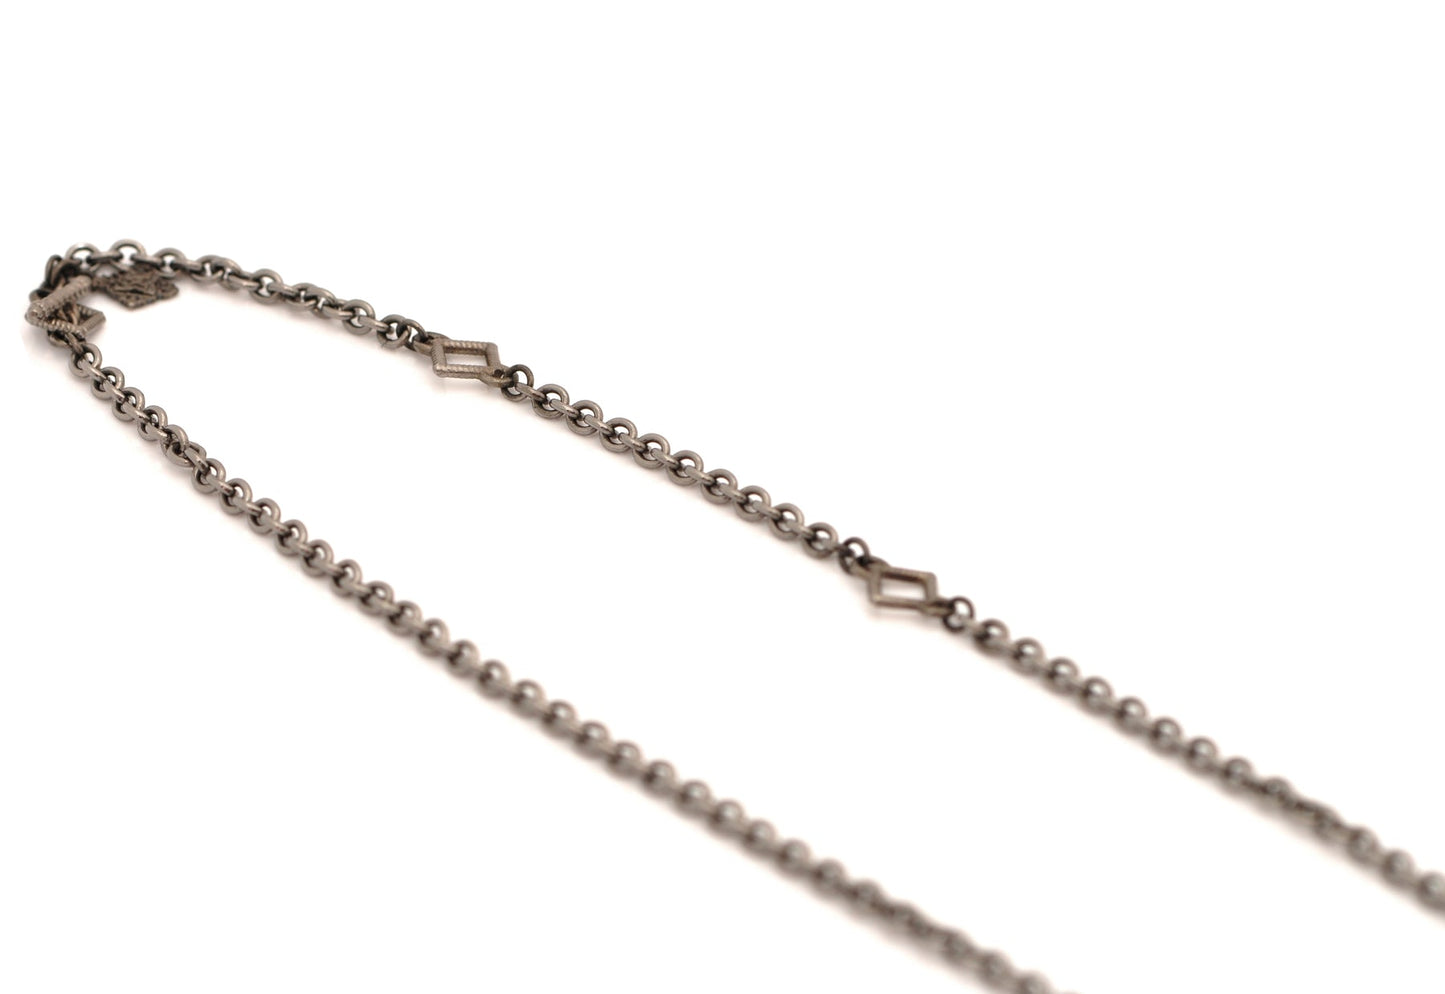 36" Chain Link Necklace with 6 Scroll Stations